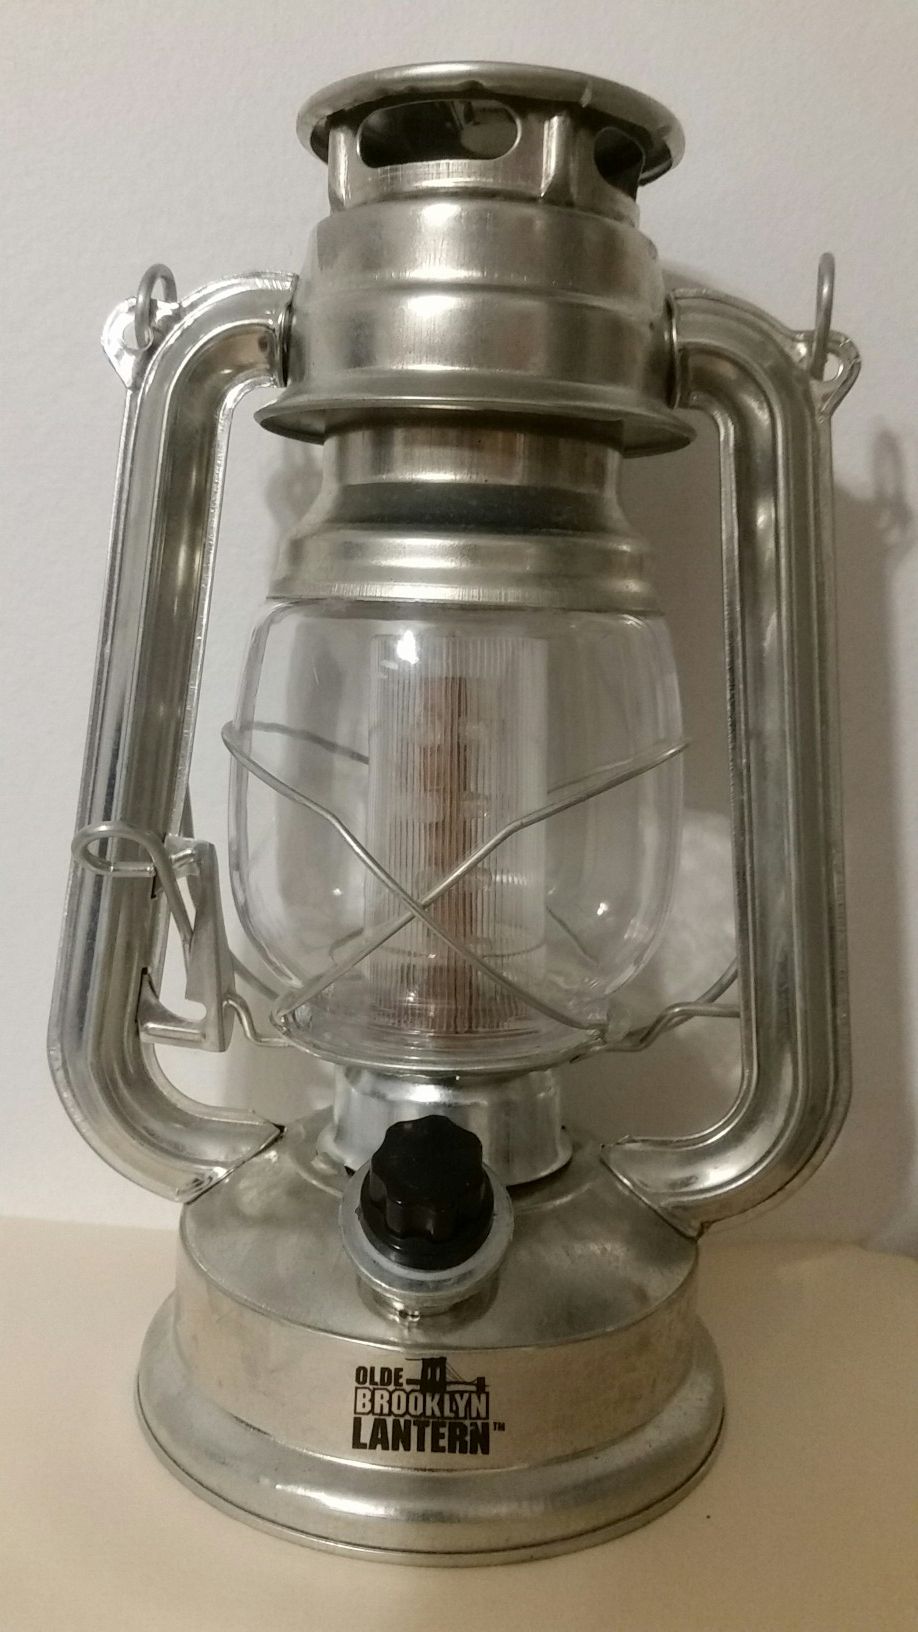 LANTERN (ANTIQUE LOOKING BUT BATTERY POWERED) $25.